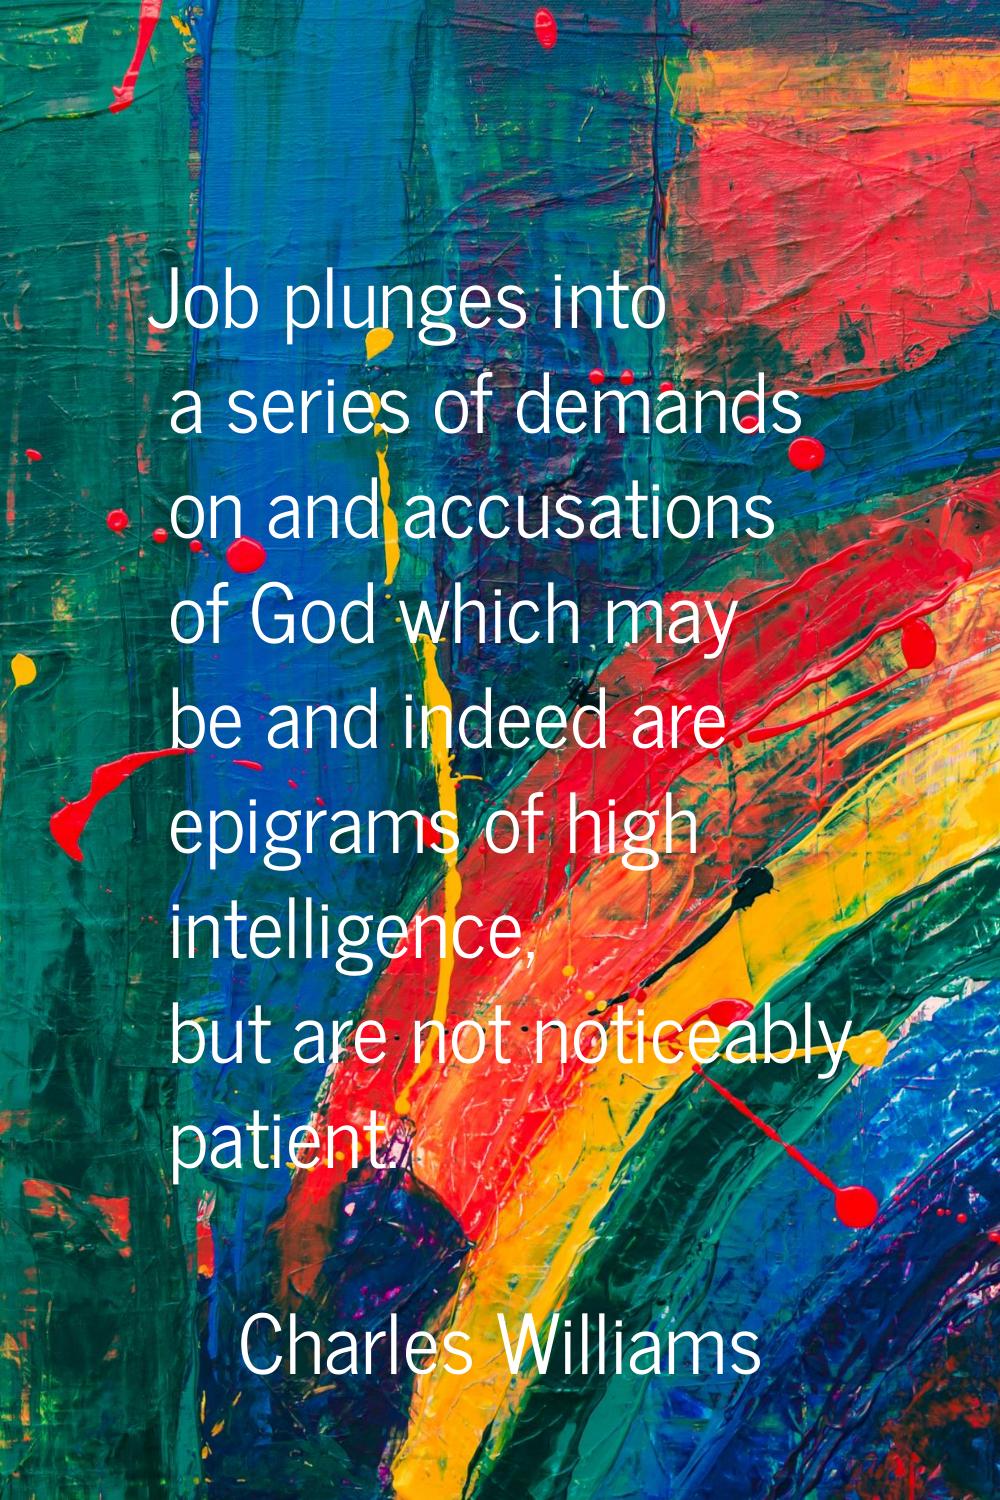 Job plunges into a series of demands on and accusations of God which may be and indeed are epigrams